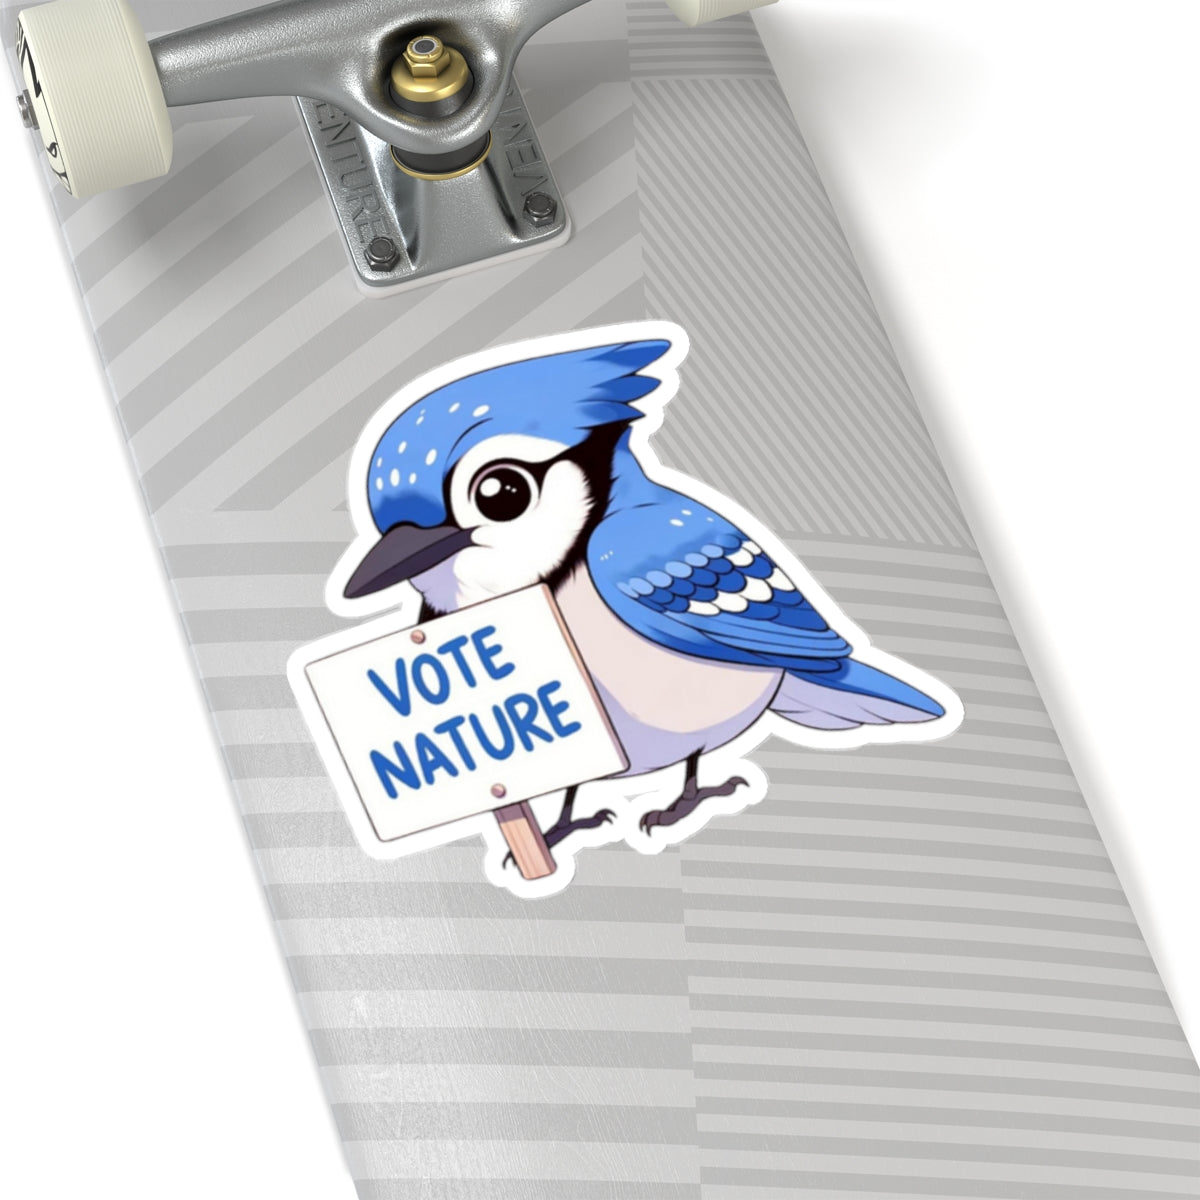 Inspirational Cute Bluejay Statement vinyl Sticker: Vote Nature! for laptop, kindle, phone, ipad, instrument case, notebook, mood board